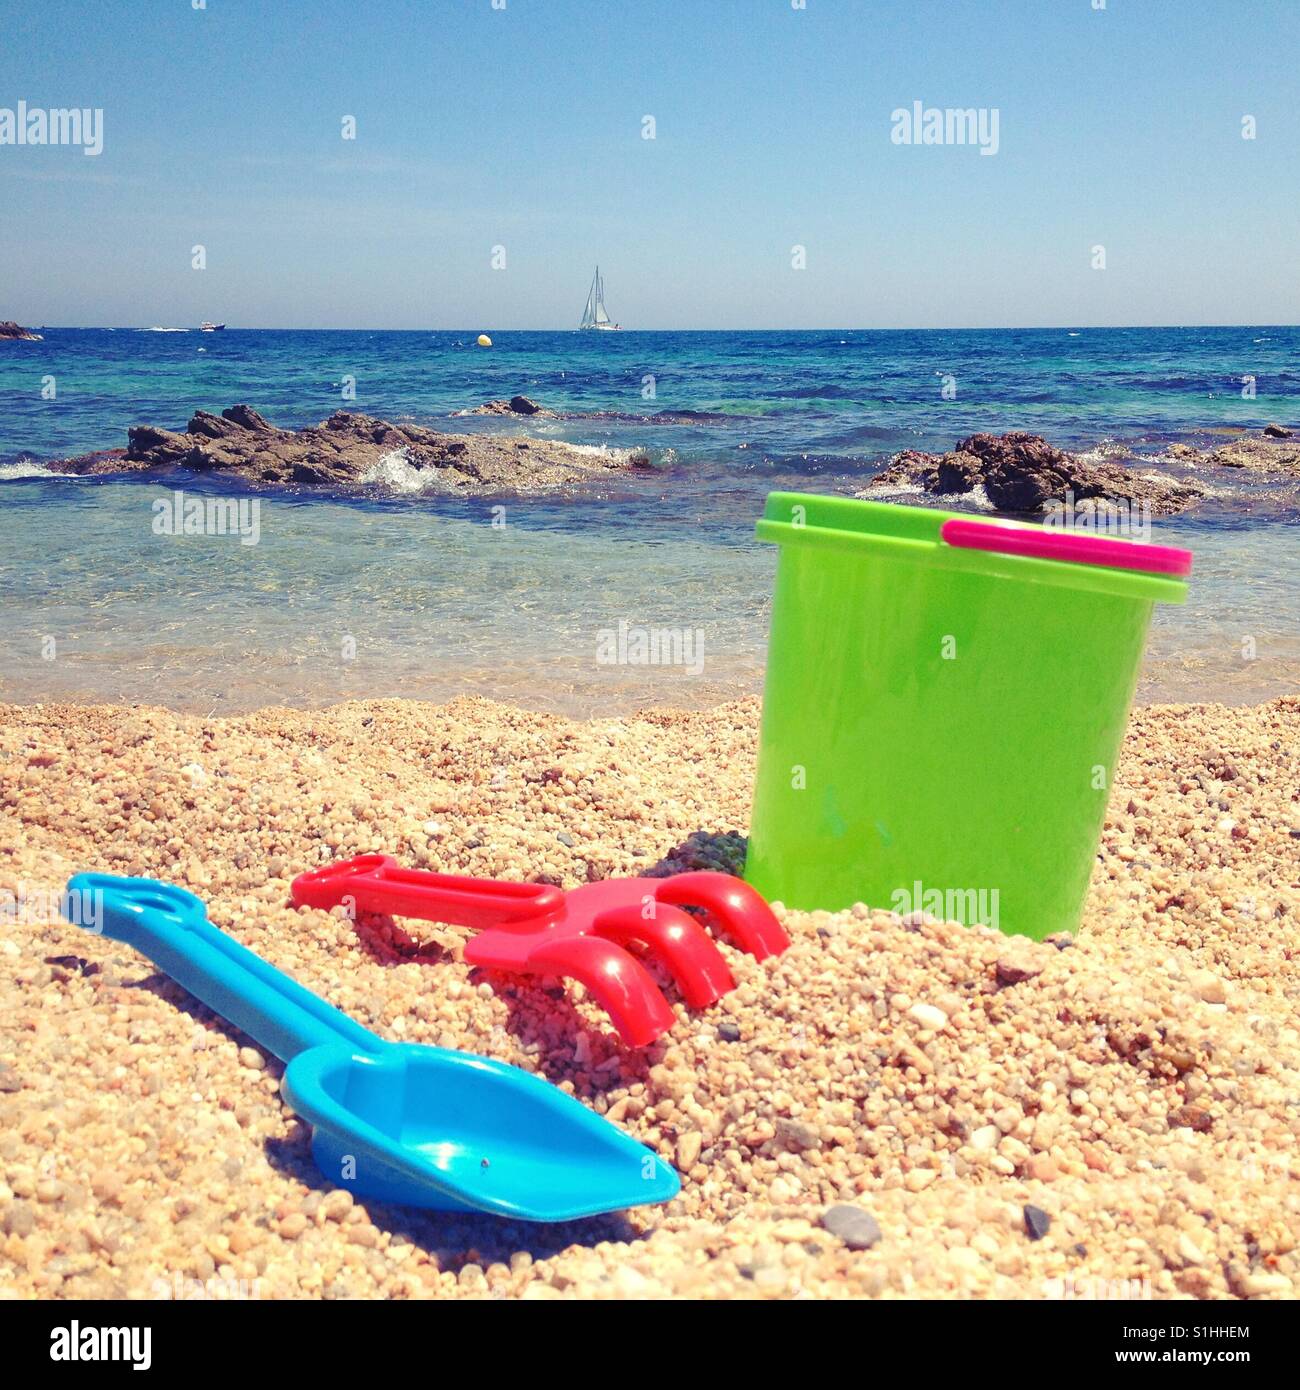 Summer scene in the beach with playthings on the sand and sailboat in the sea. Stock Photo